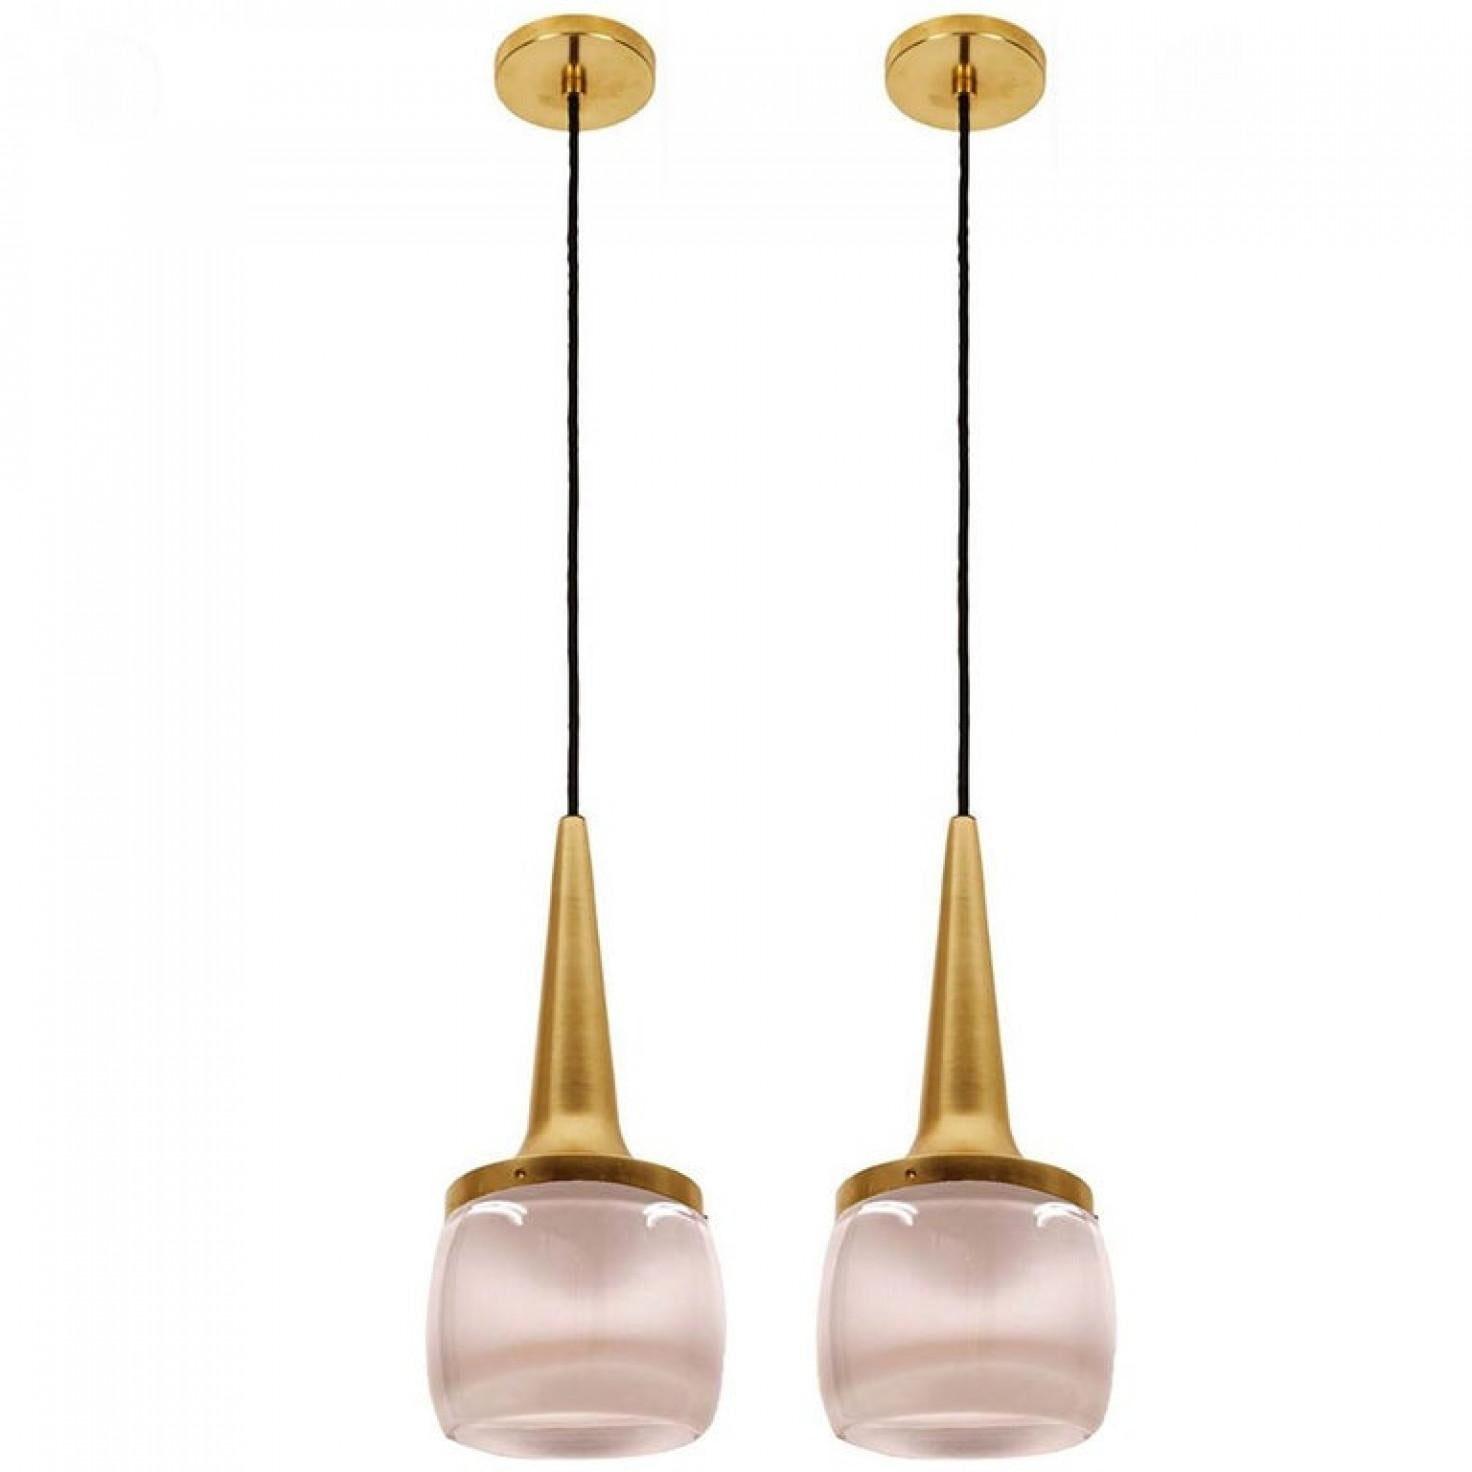 This pair of elegant cascade light fixtures was manufactured by Staff Leuchten in Germany. The light is executed in brassed aluminium and thick off white opaline molded glass etched on the inside.

Each individual pendant measures: 13.5 in. H x 5.25